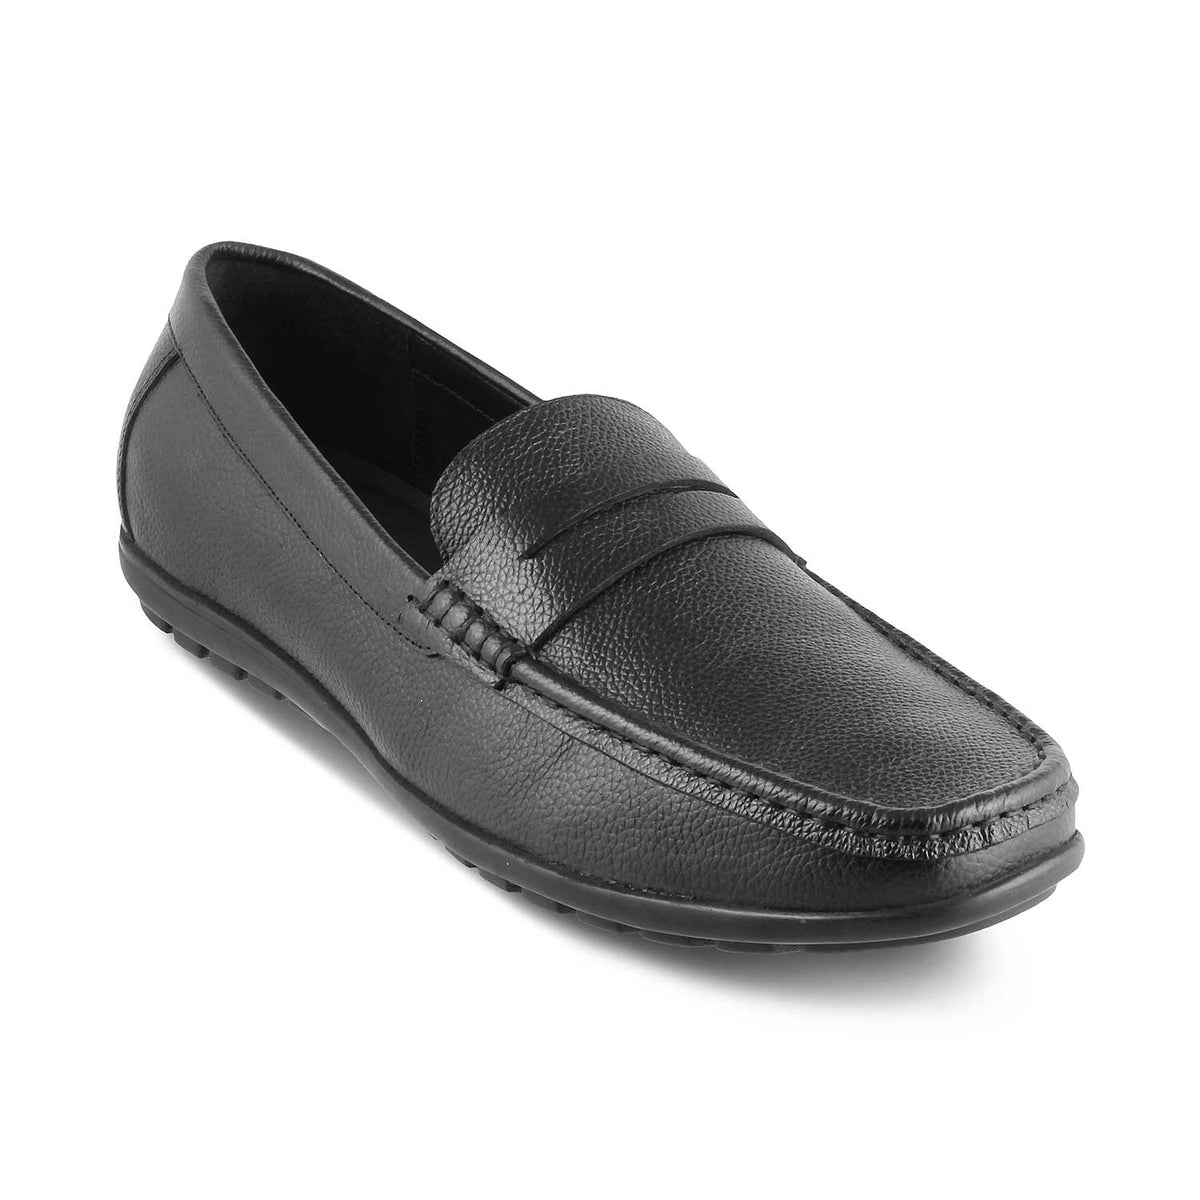 The Lemec Black Men's Leather Penny Loafers Tresmode